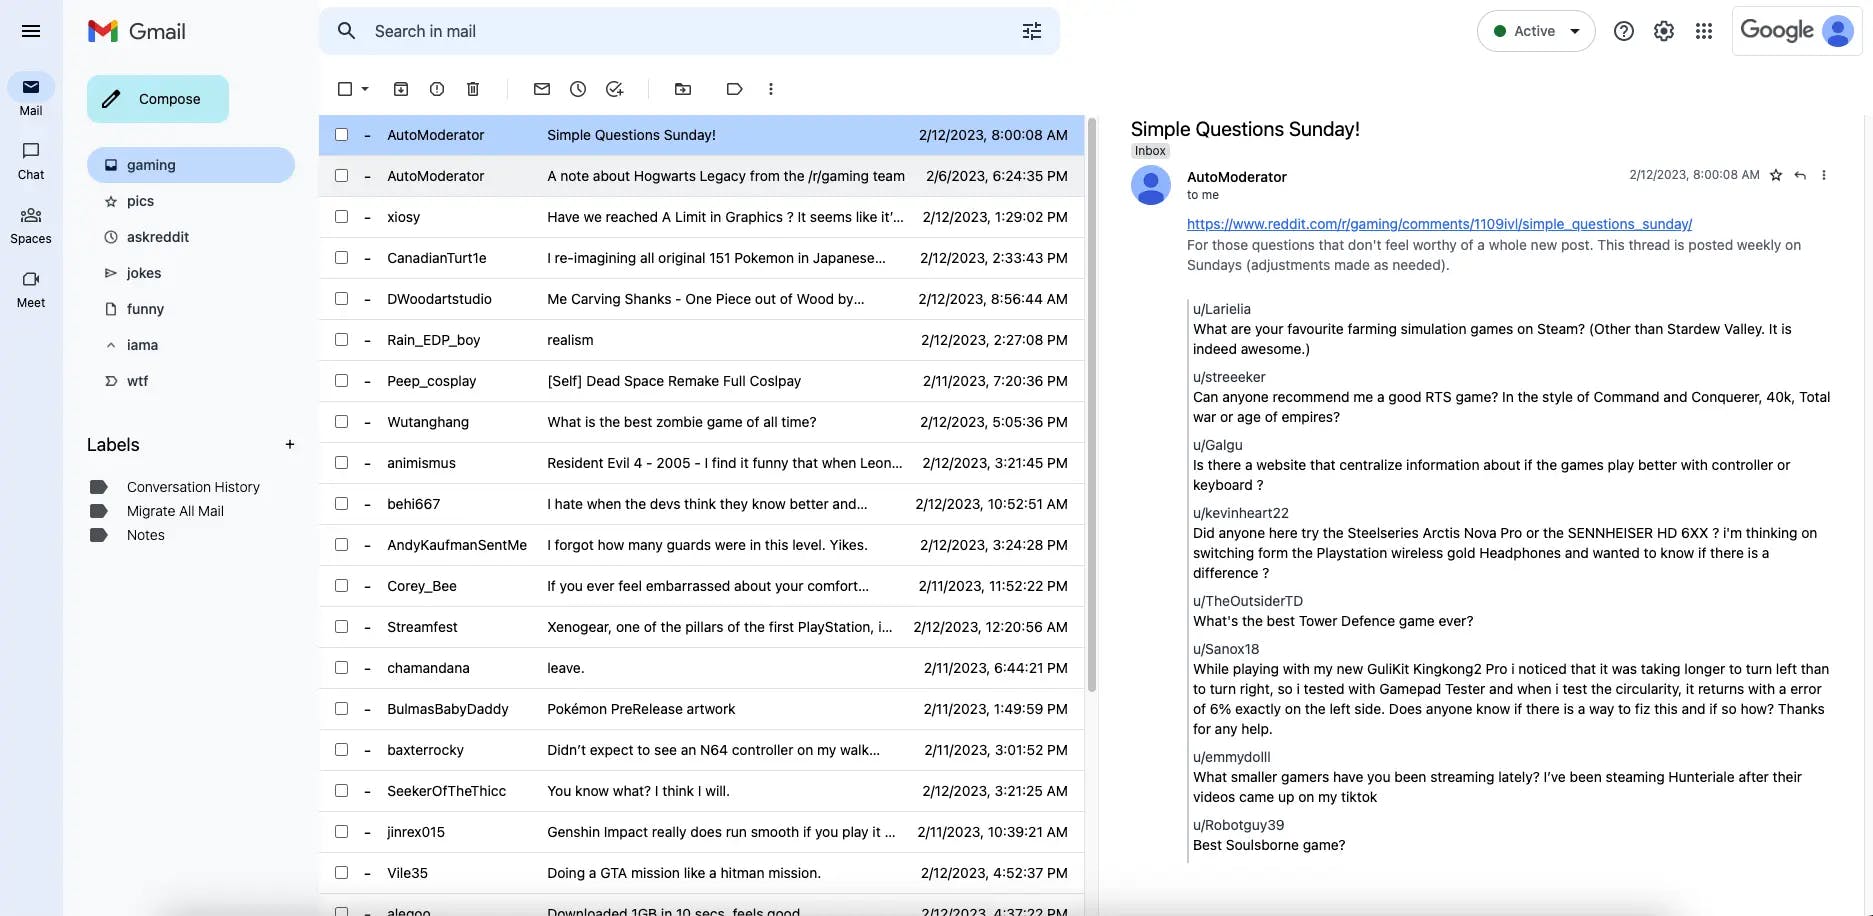 Creating a reddit client that looks like gmail: Introducing GmailKit